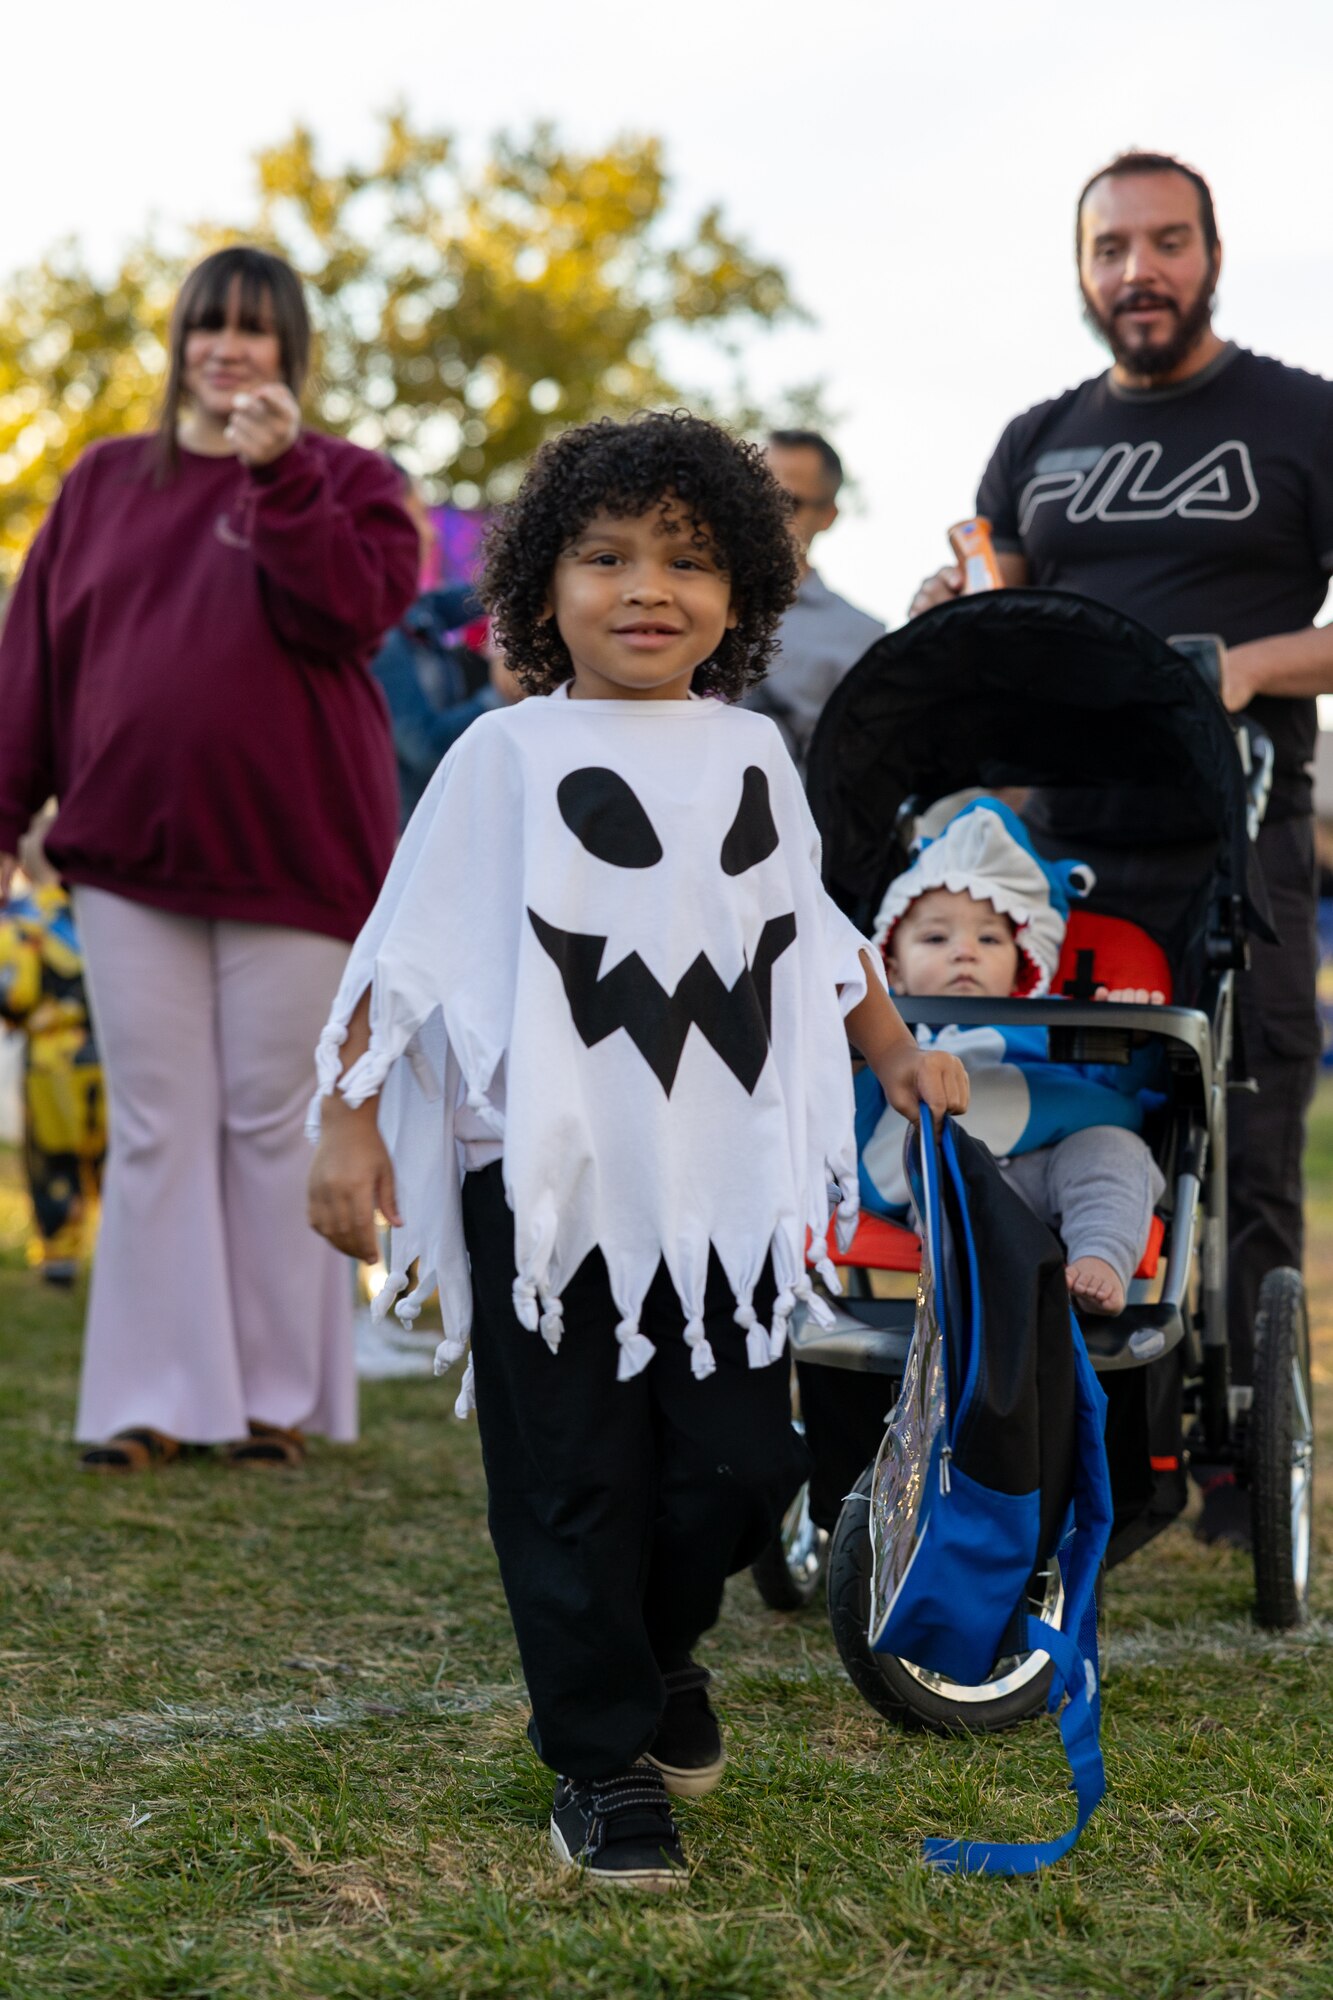 Kids in costume with parents